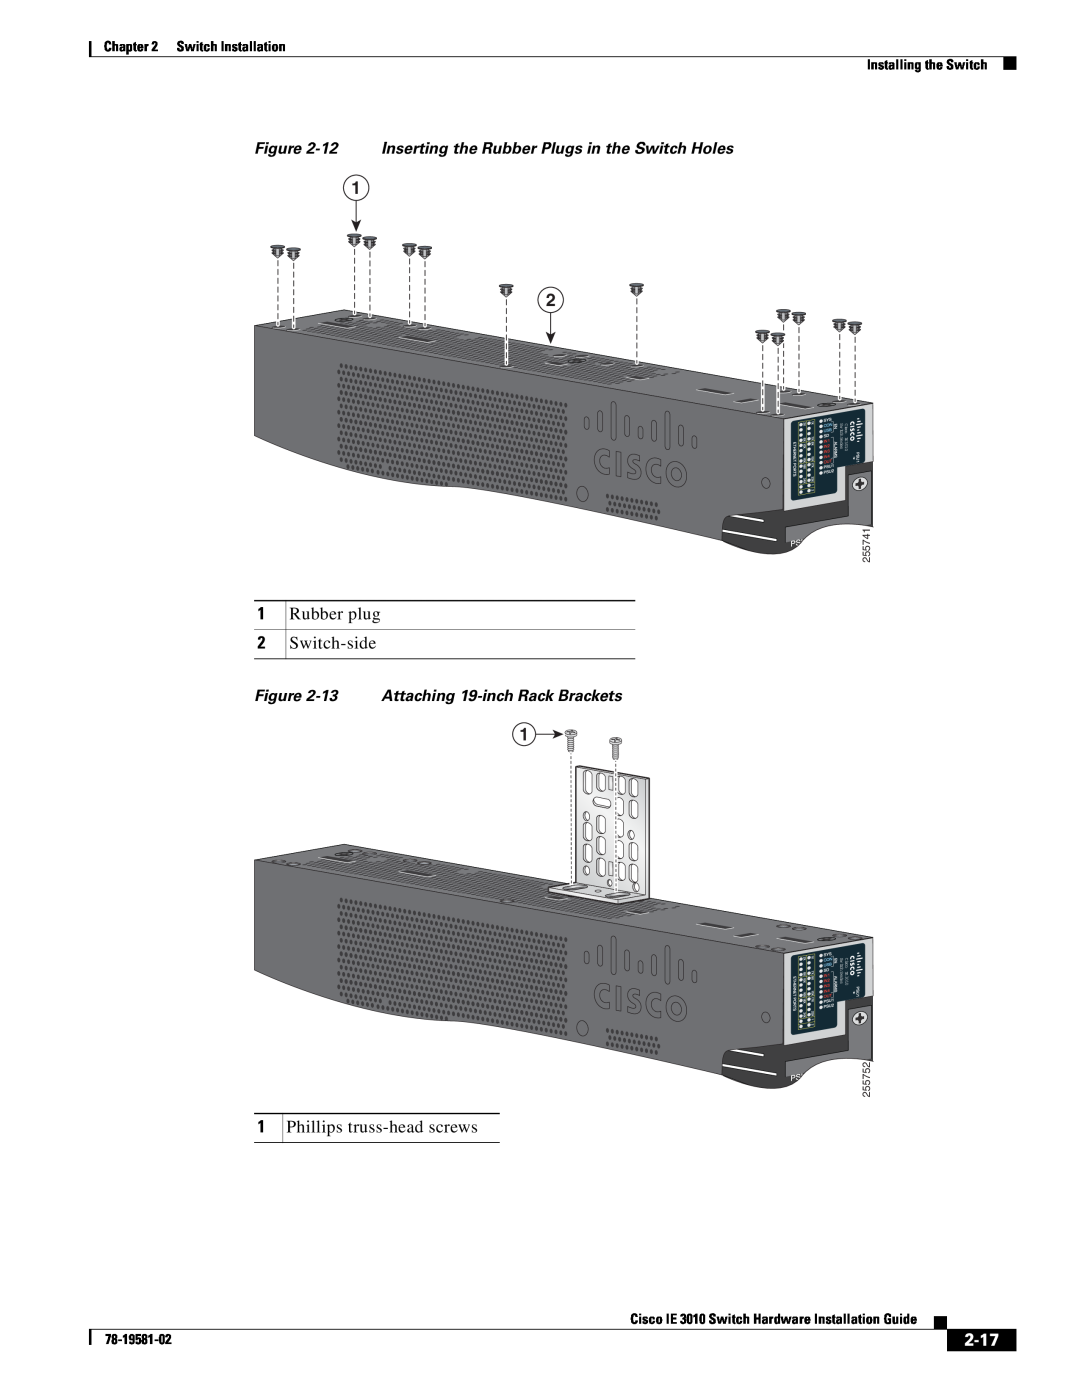 Cisco Systems IE301024TC manual 2-17, 12 Inserting the Rubber Plugs in the Switch Holes, 13 Attaching 19-inch Rack Brackets 